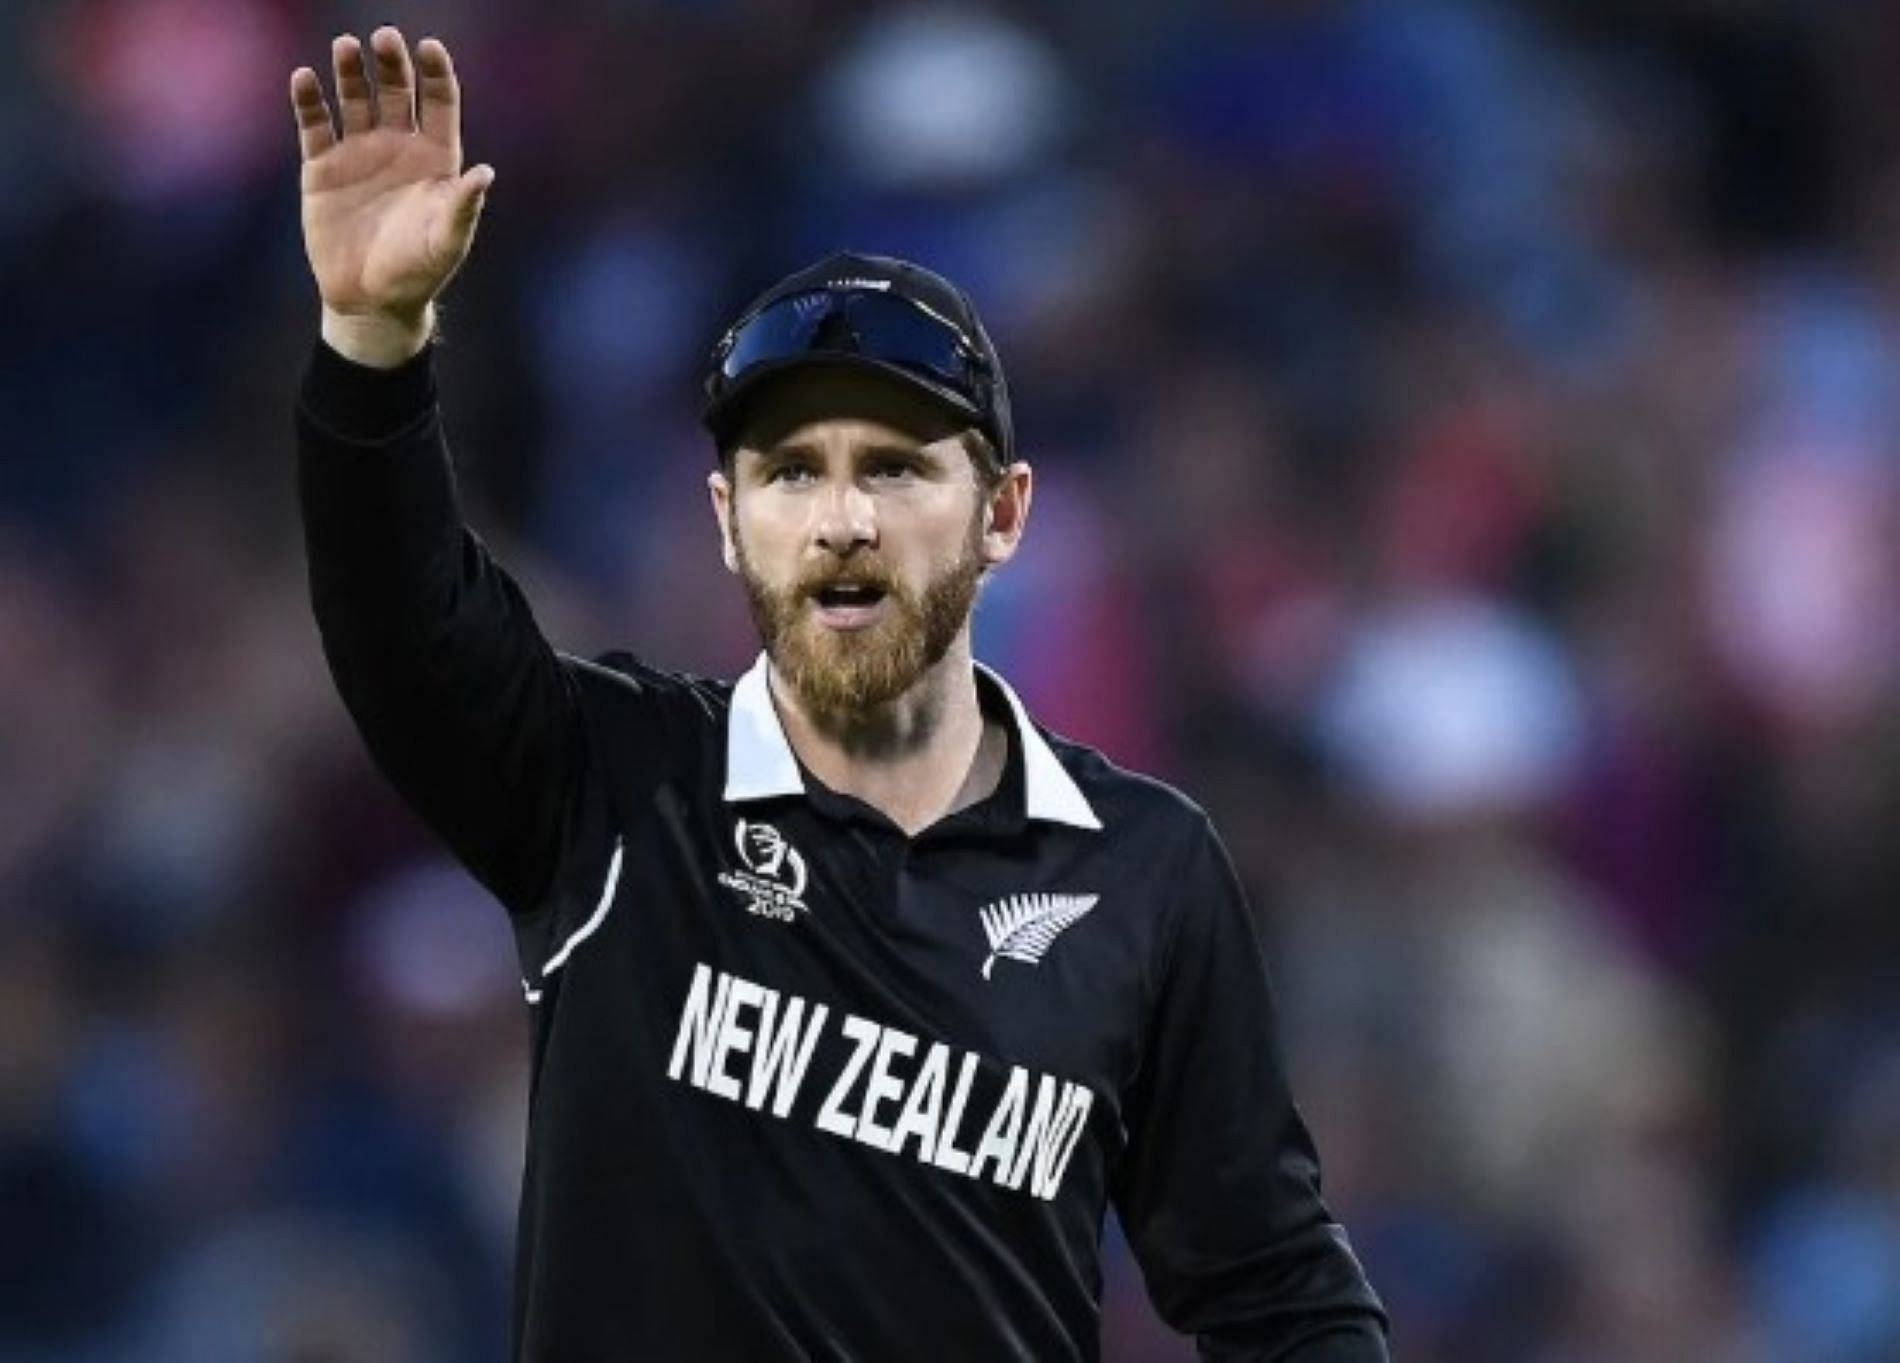 Kane Williamson will look to lead New Zealand into a third consecutive ODI World Cup final